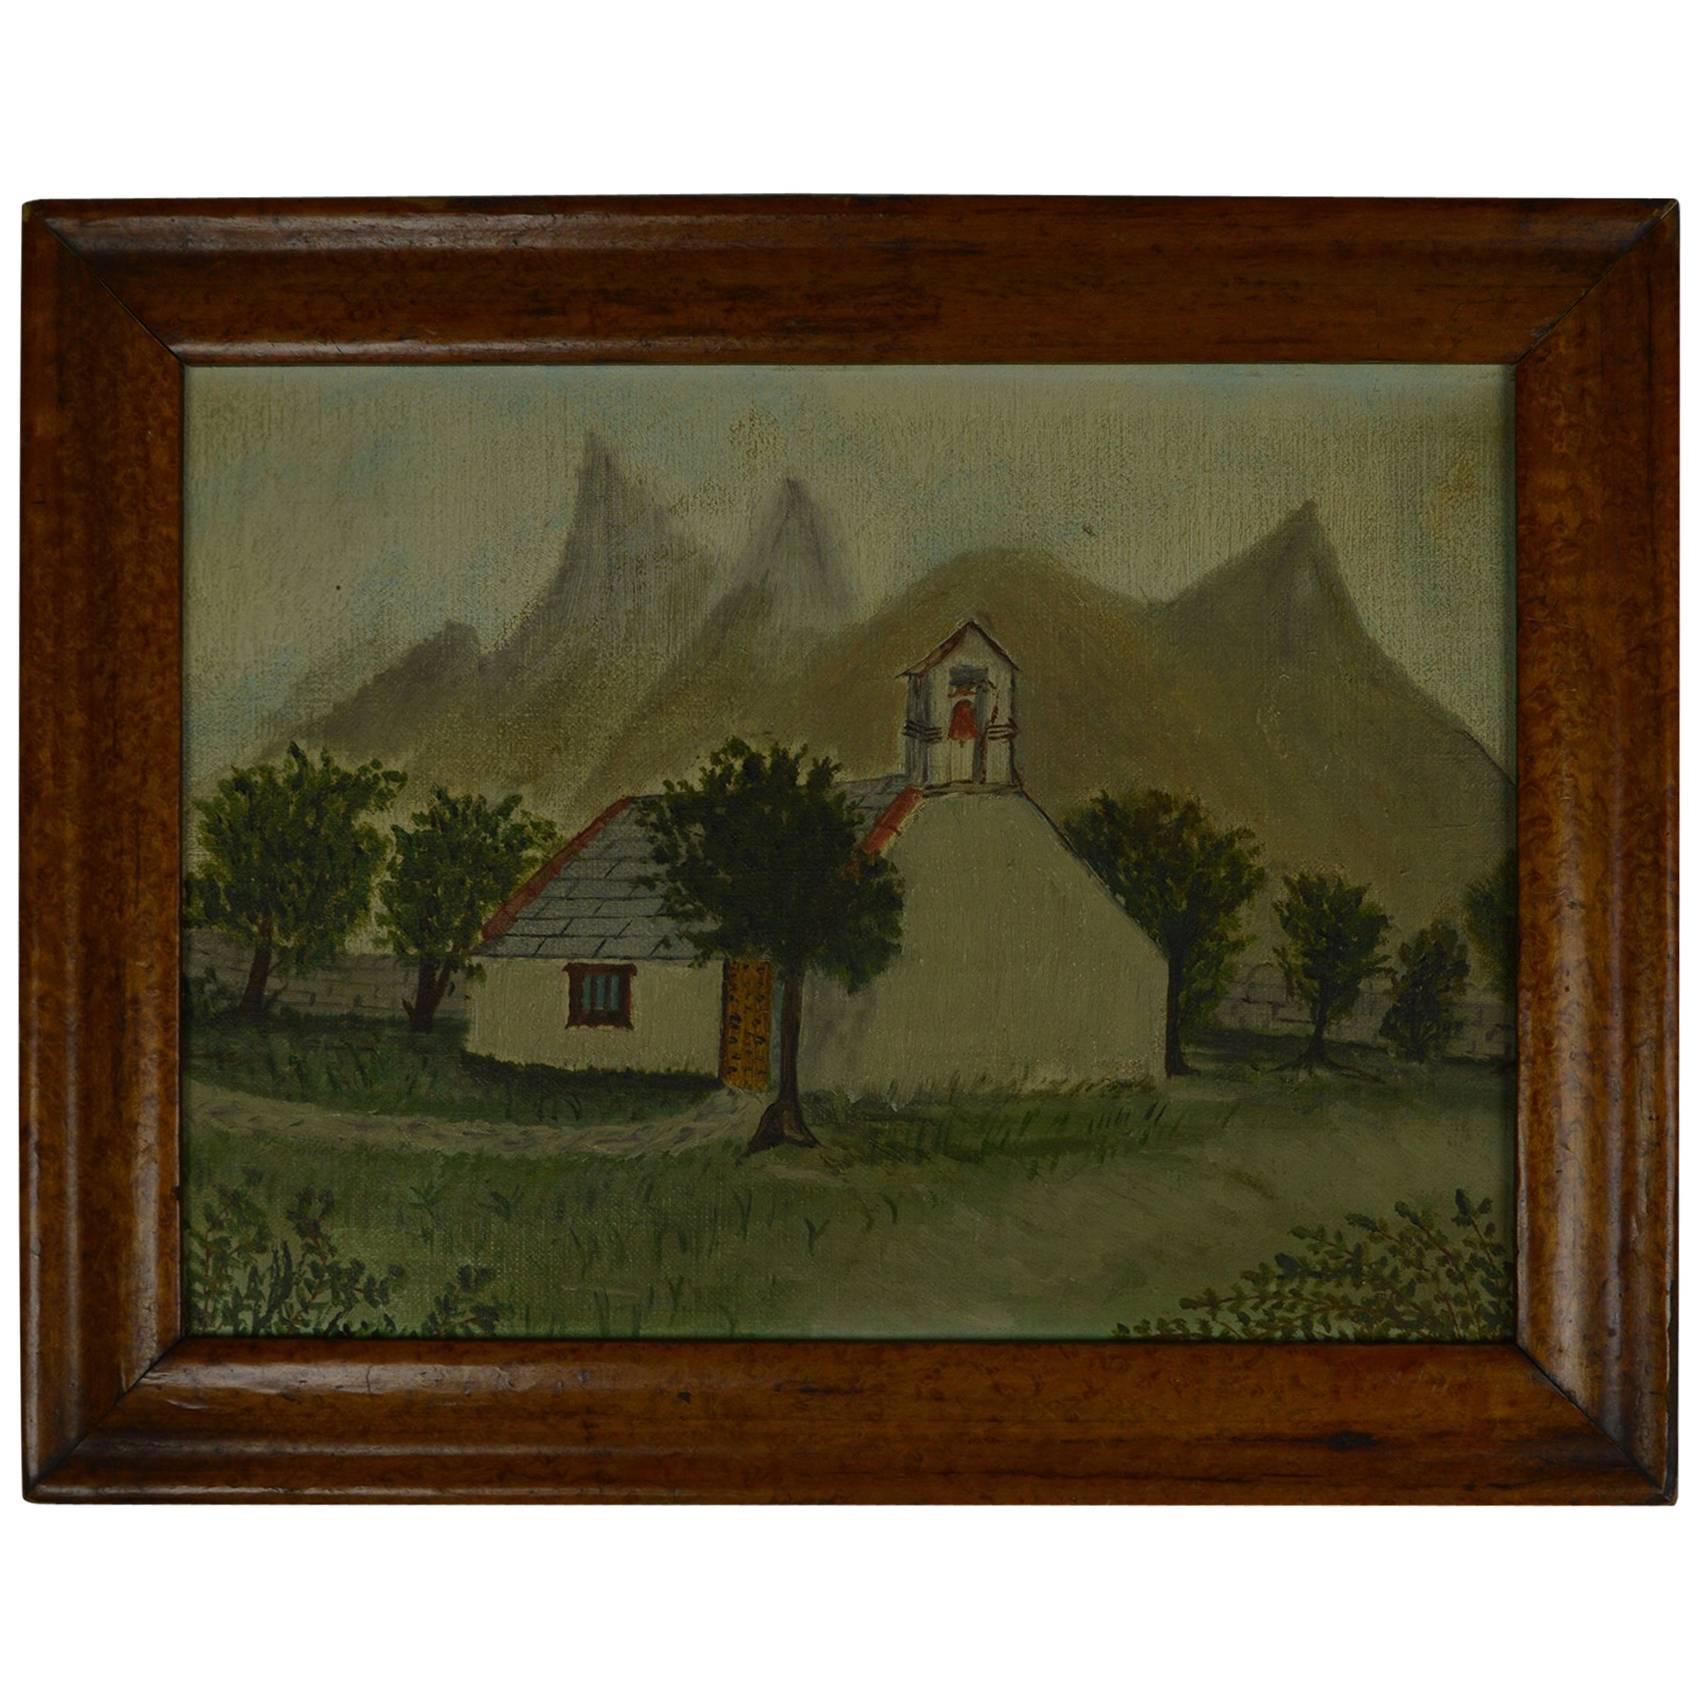 Charming image of a church in an alpine landscape.

Oil on canvas board.

English, late 19th century.

Artist unknown.

Presented in an antique bird’s-eye maple frame.